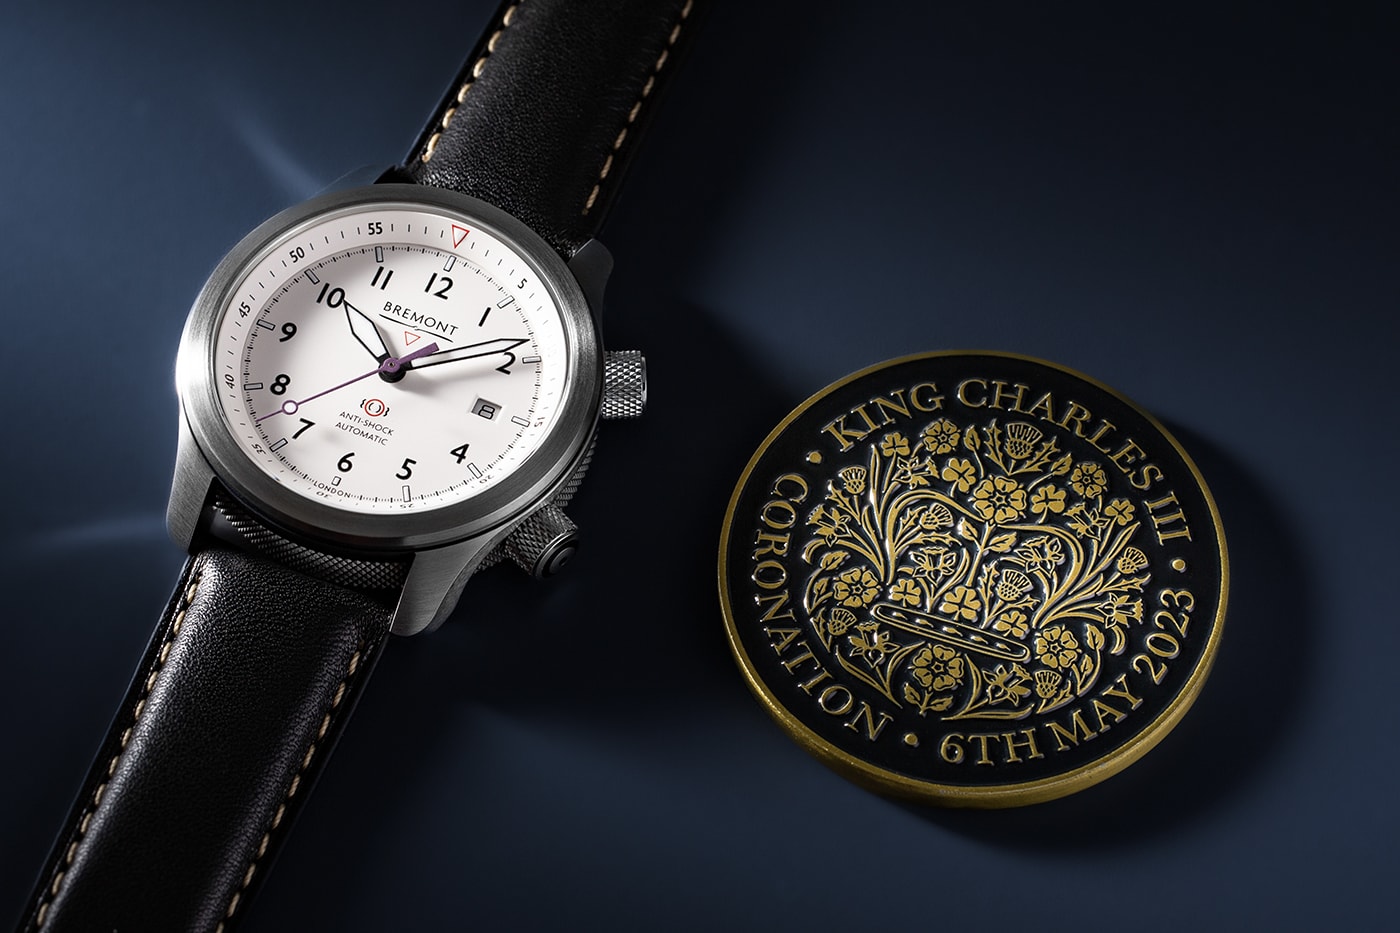 Bremont MBII King Charles III Limited-Edition Commemorative Timepiece Release Info